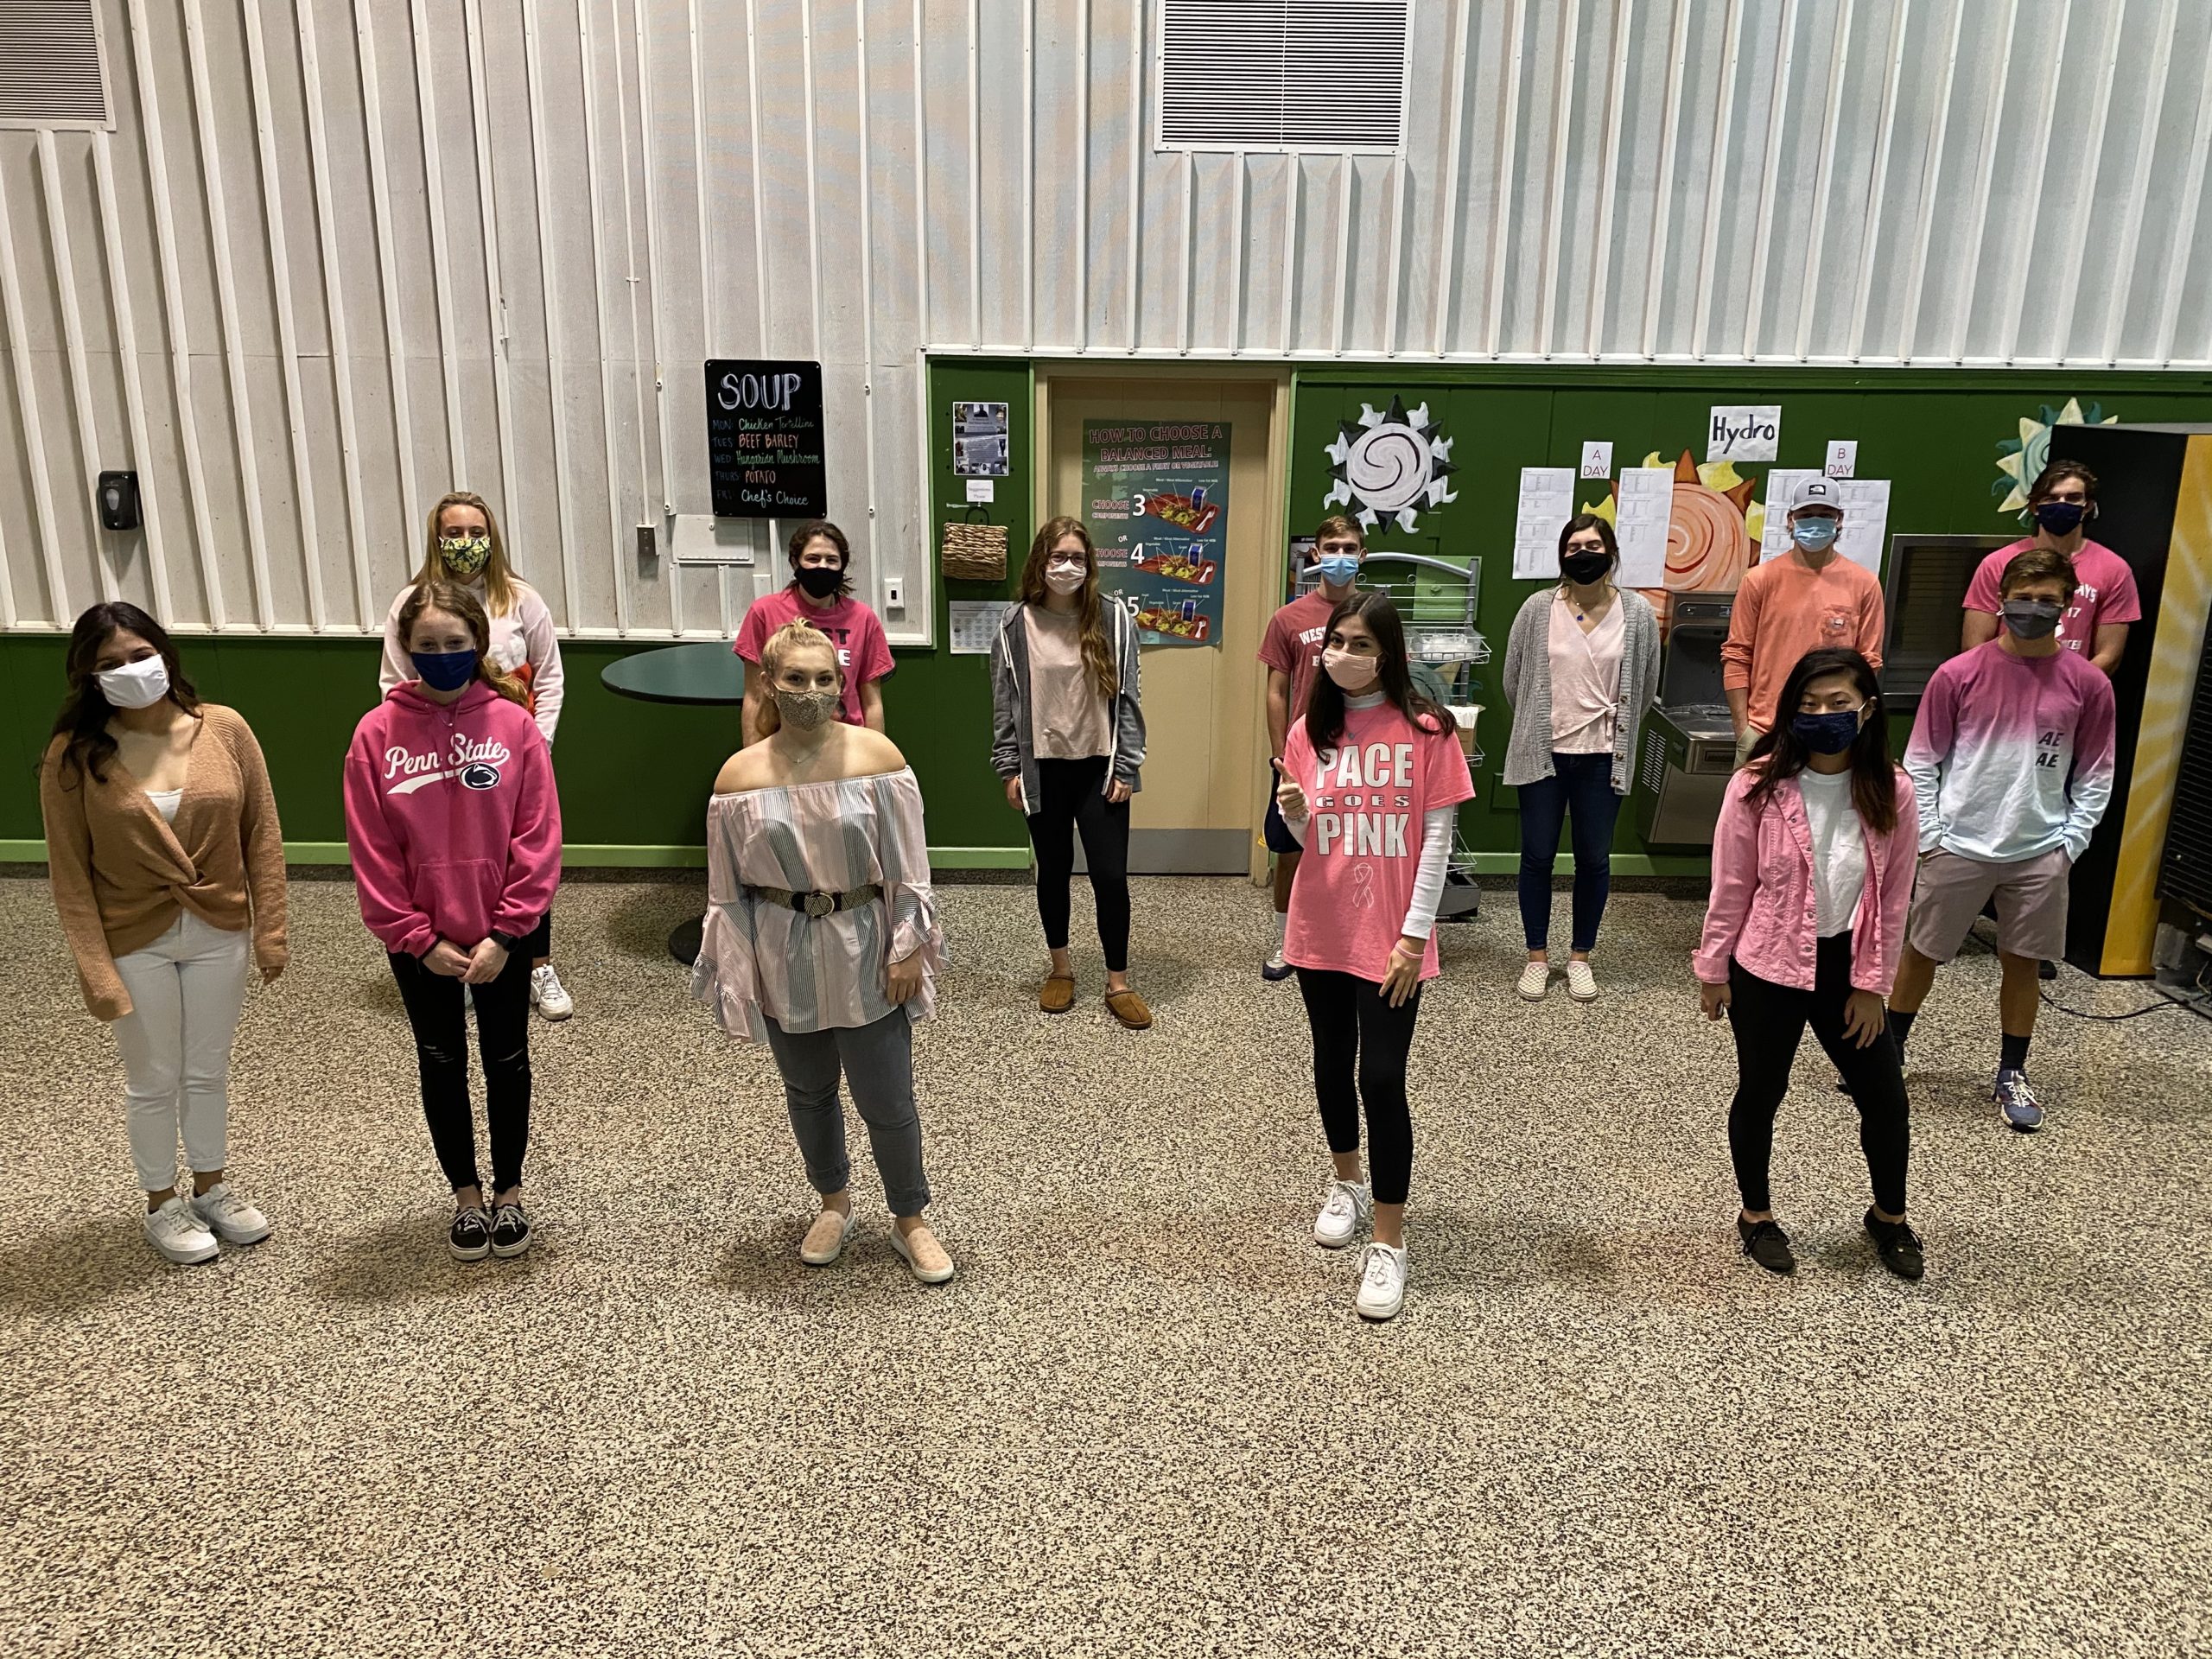 To raise awareness about breast cancer, members of the Westhampton Beach High School National Honor Society sponsored a Wear Pink to School campaign. On October 22 and 23, all students were encouraged to wear pink in acknowledgment of Breast Cancer Awareness Month. 